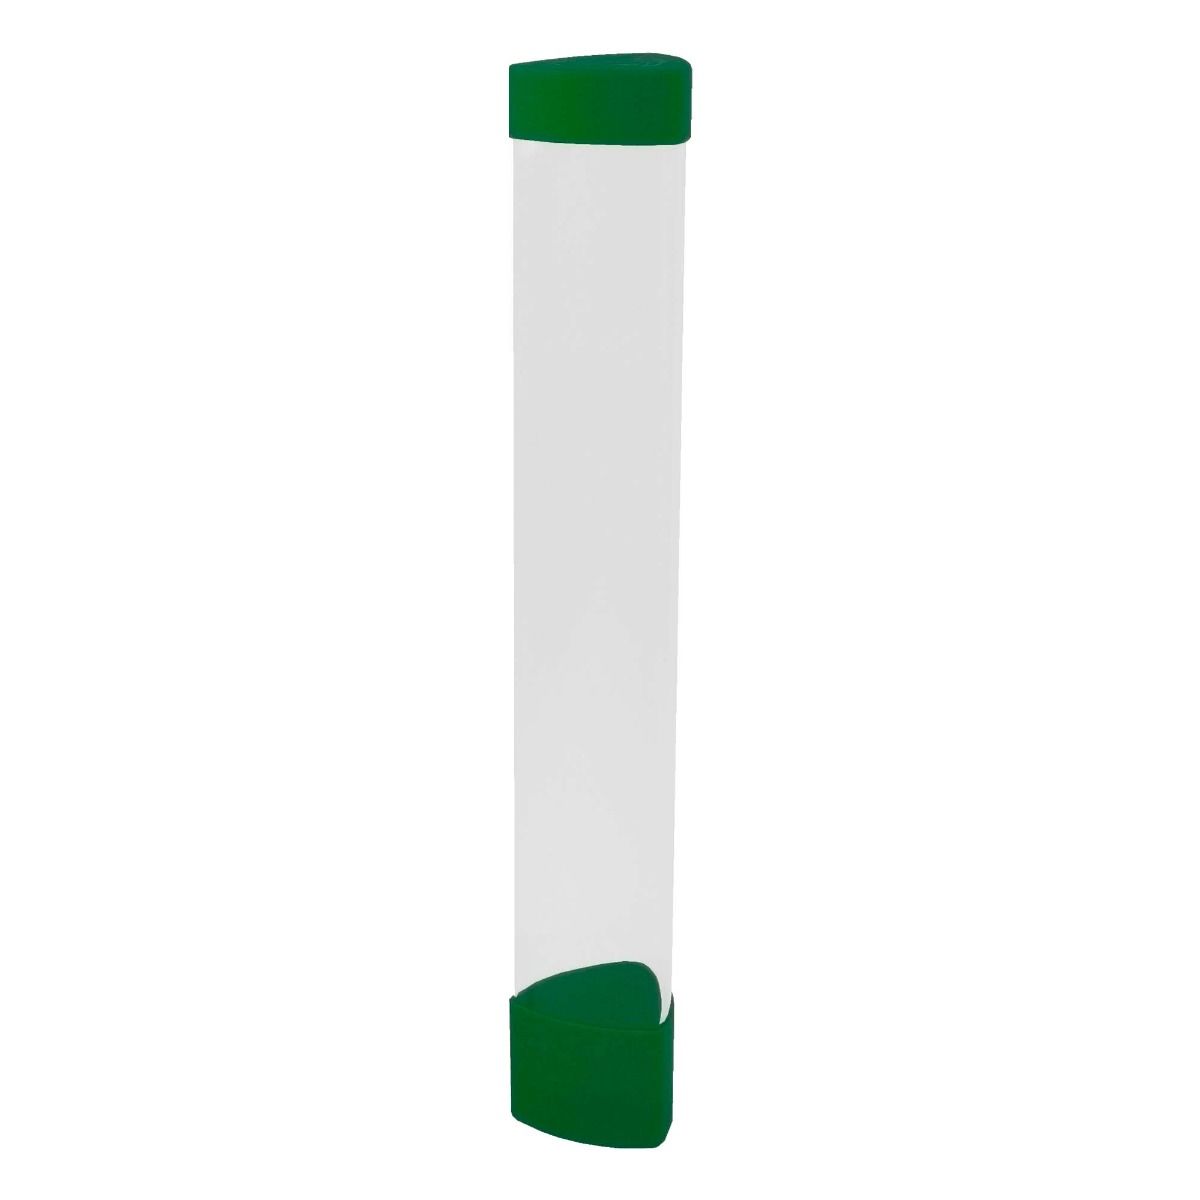 BCW - Playmat Tube with Dice Cap - Green